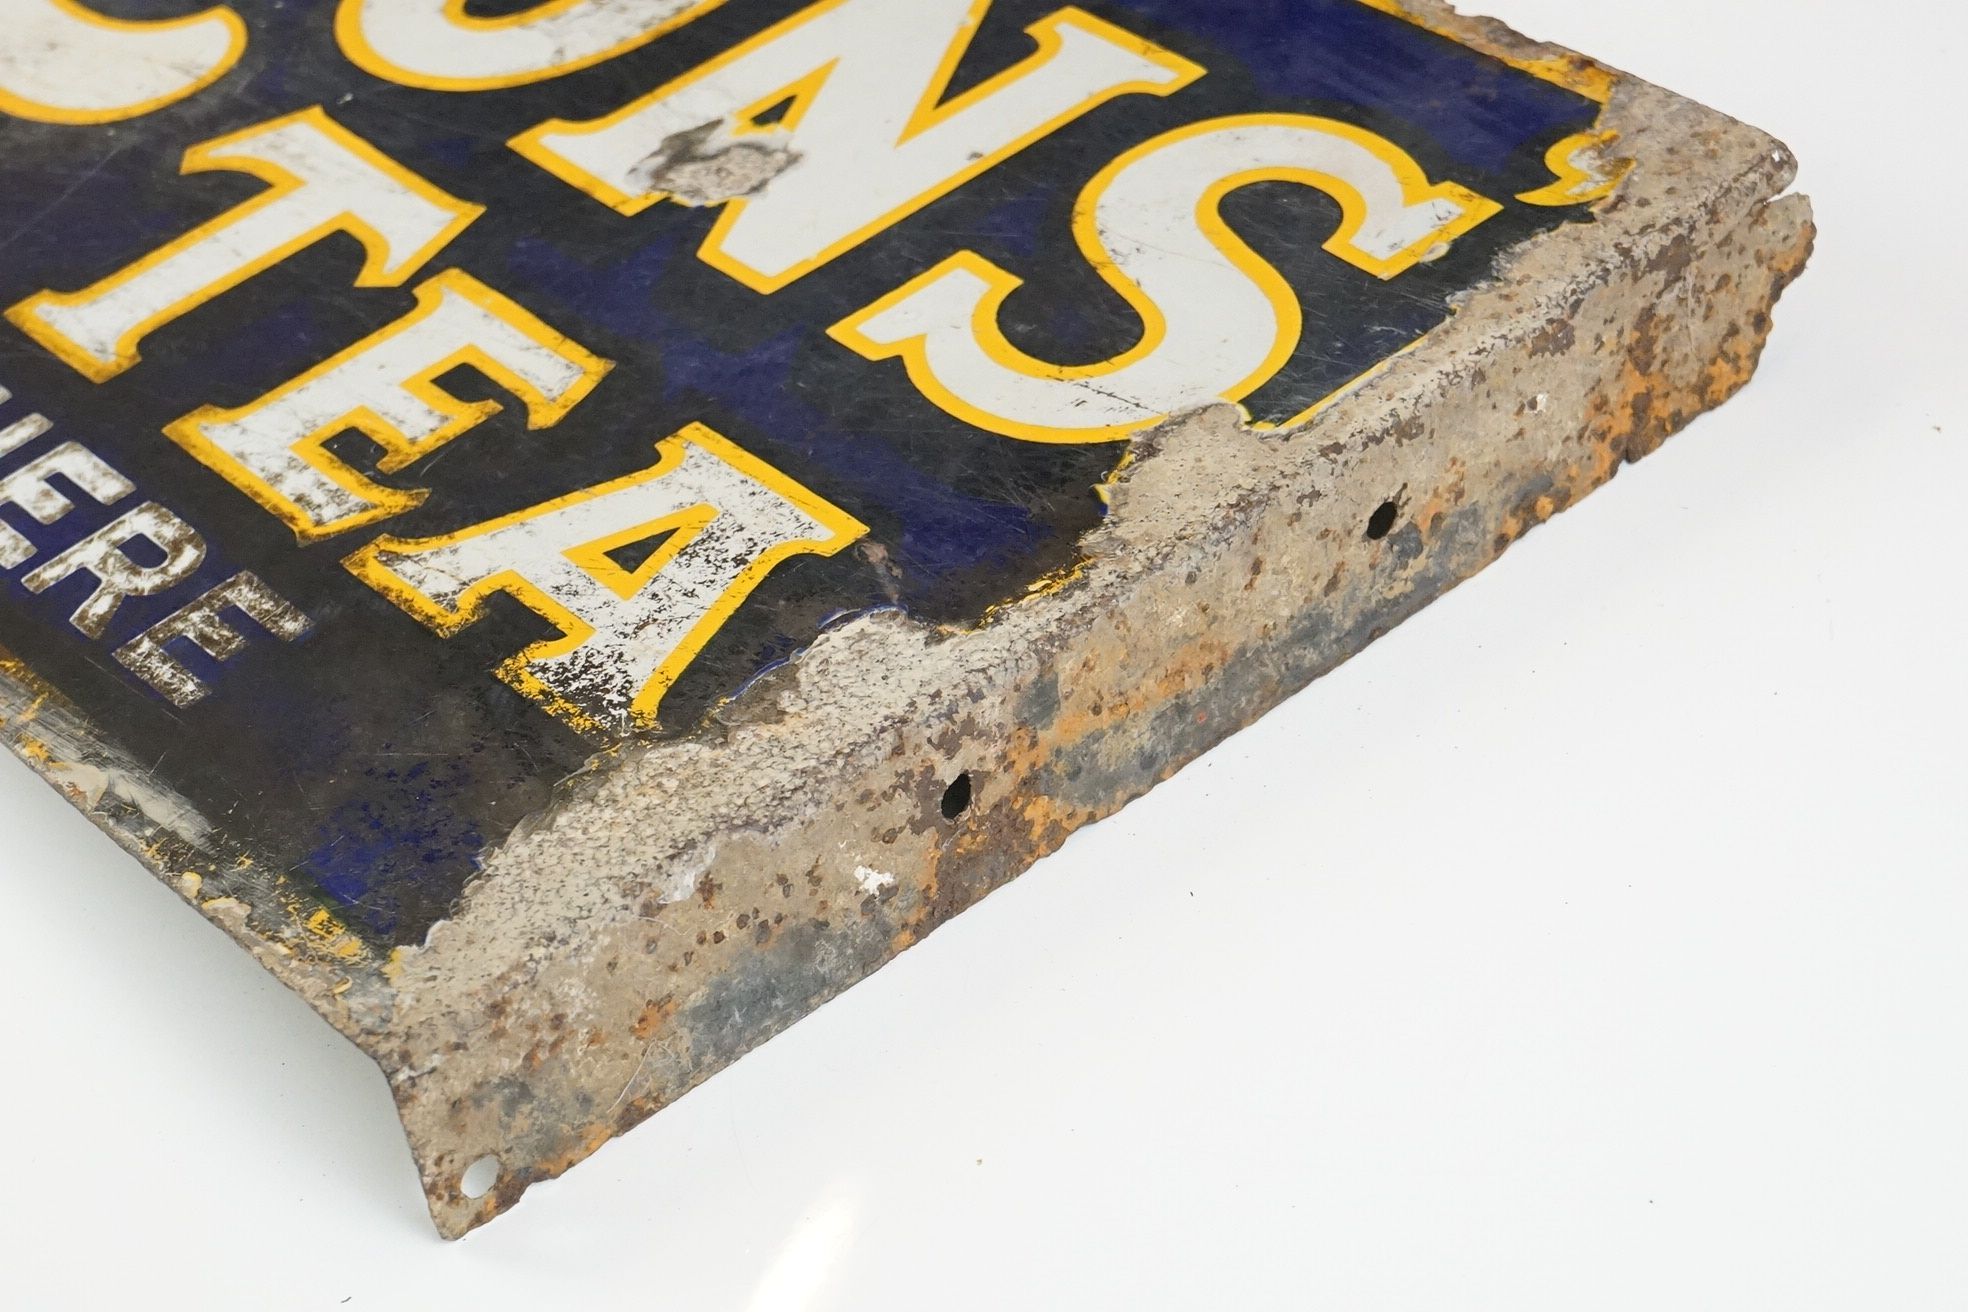 Advertising - Original ' Lyons Tea Sold Here ' double-sided enamel sign, white text on blue ground - Image 8 of 15